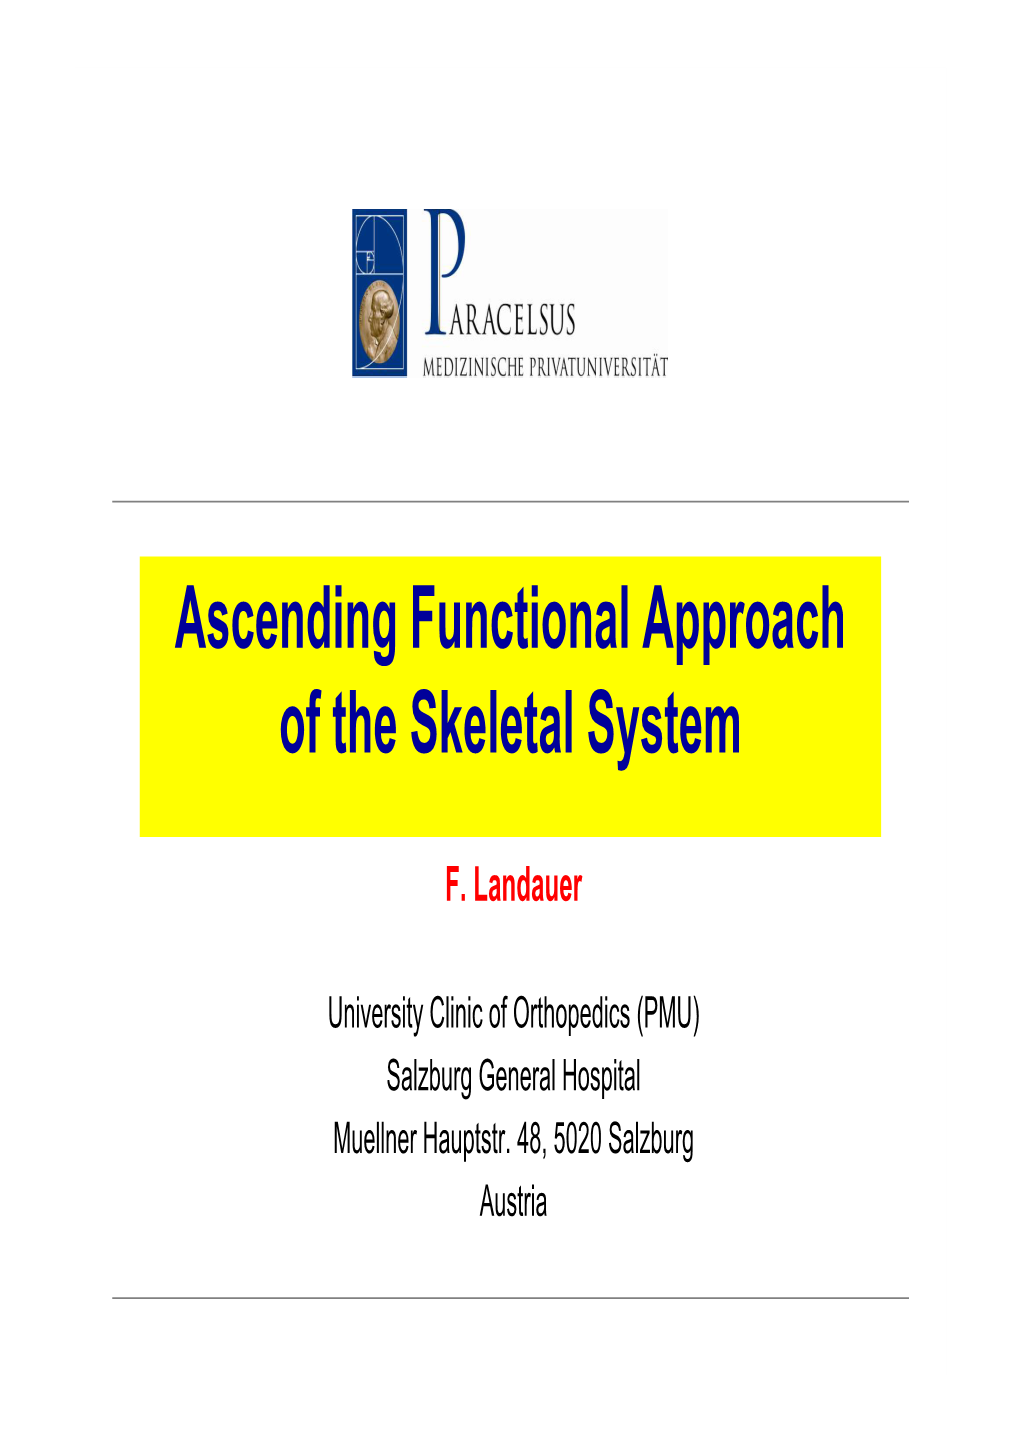 Ascending Functional Approach of the Skeletal System